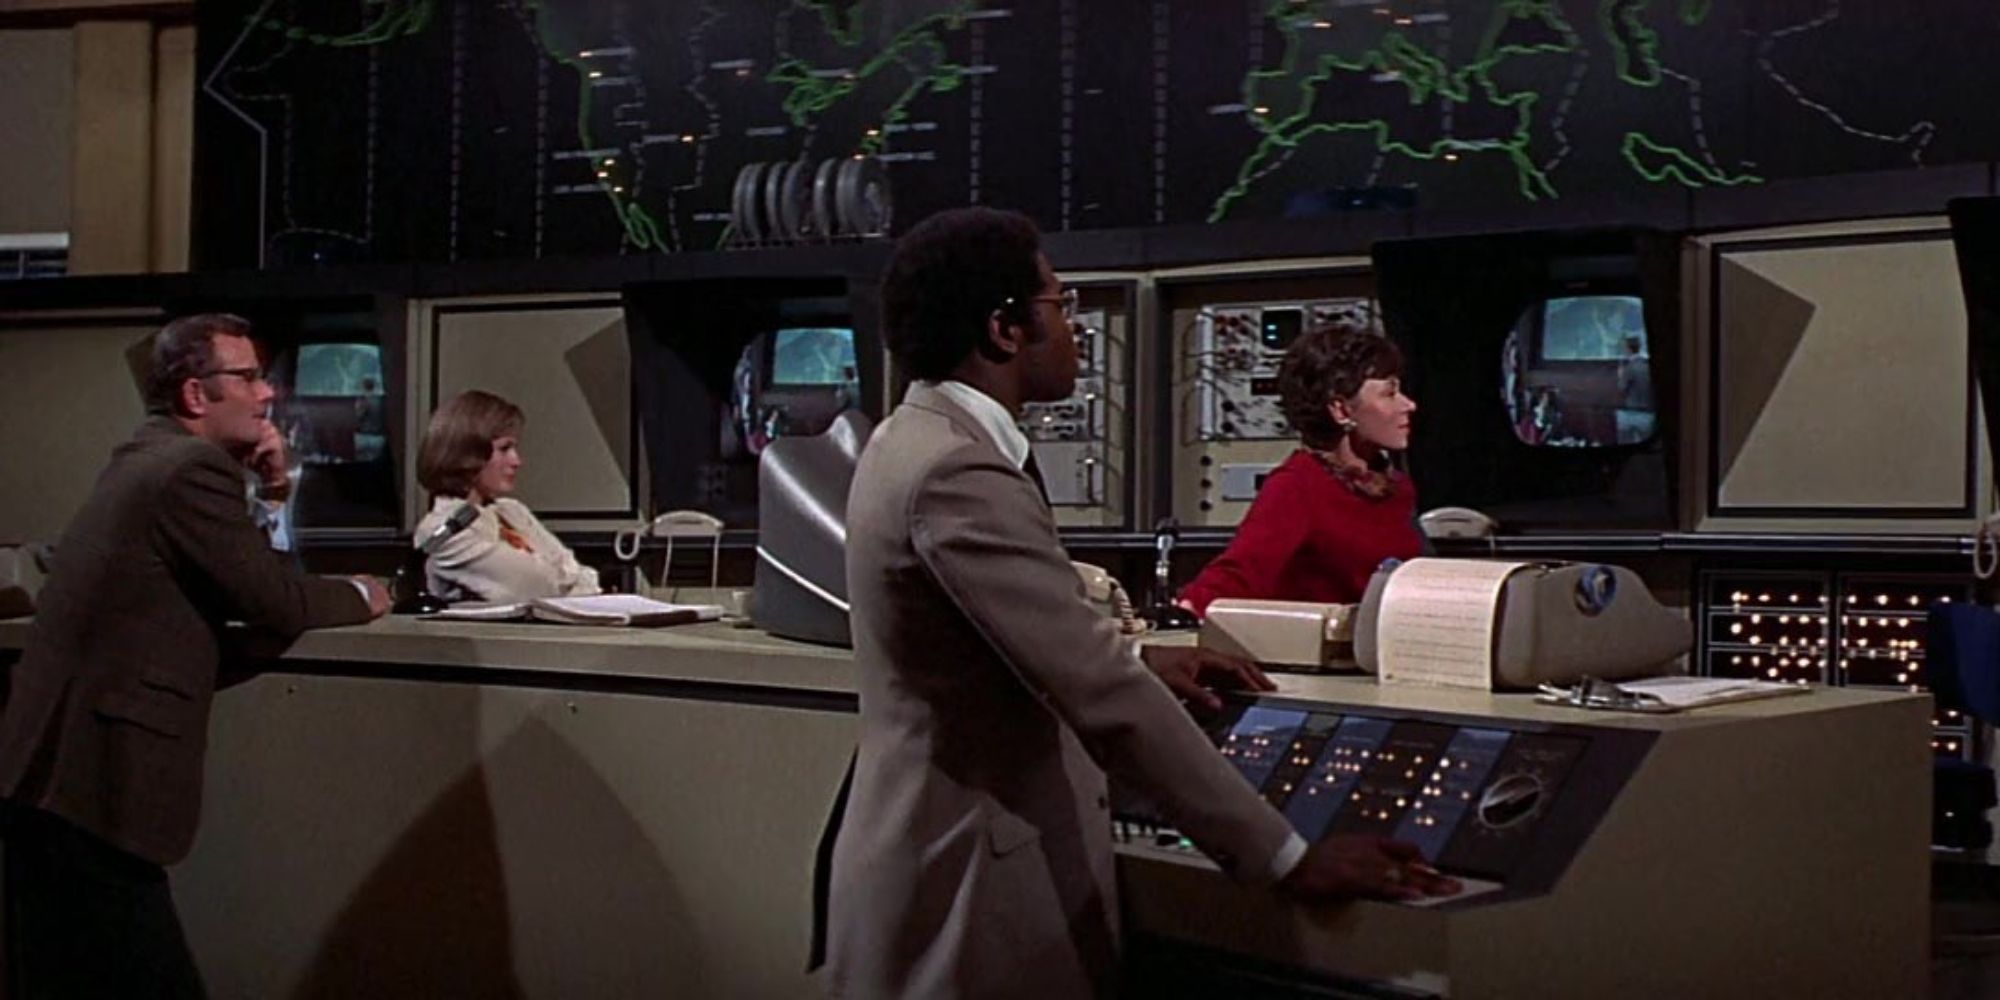 A scene from the sci-fi movie 'Colossus - The Forbin Project'